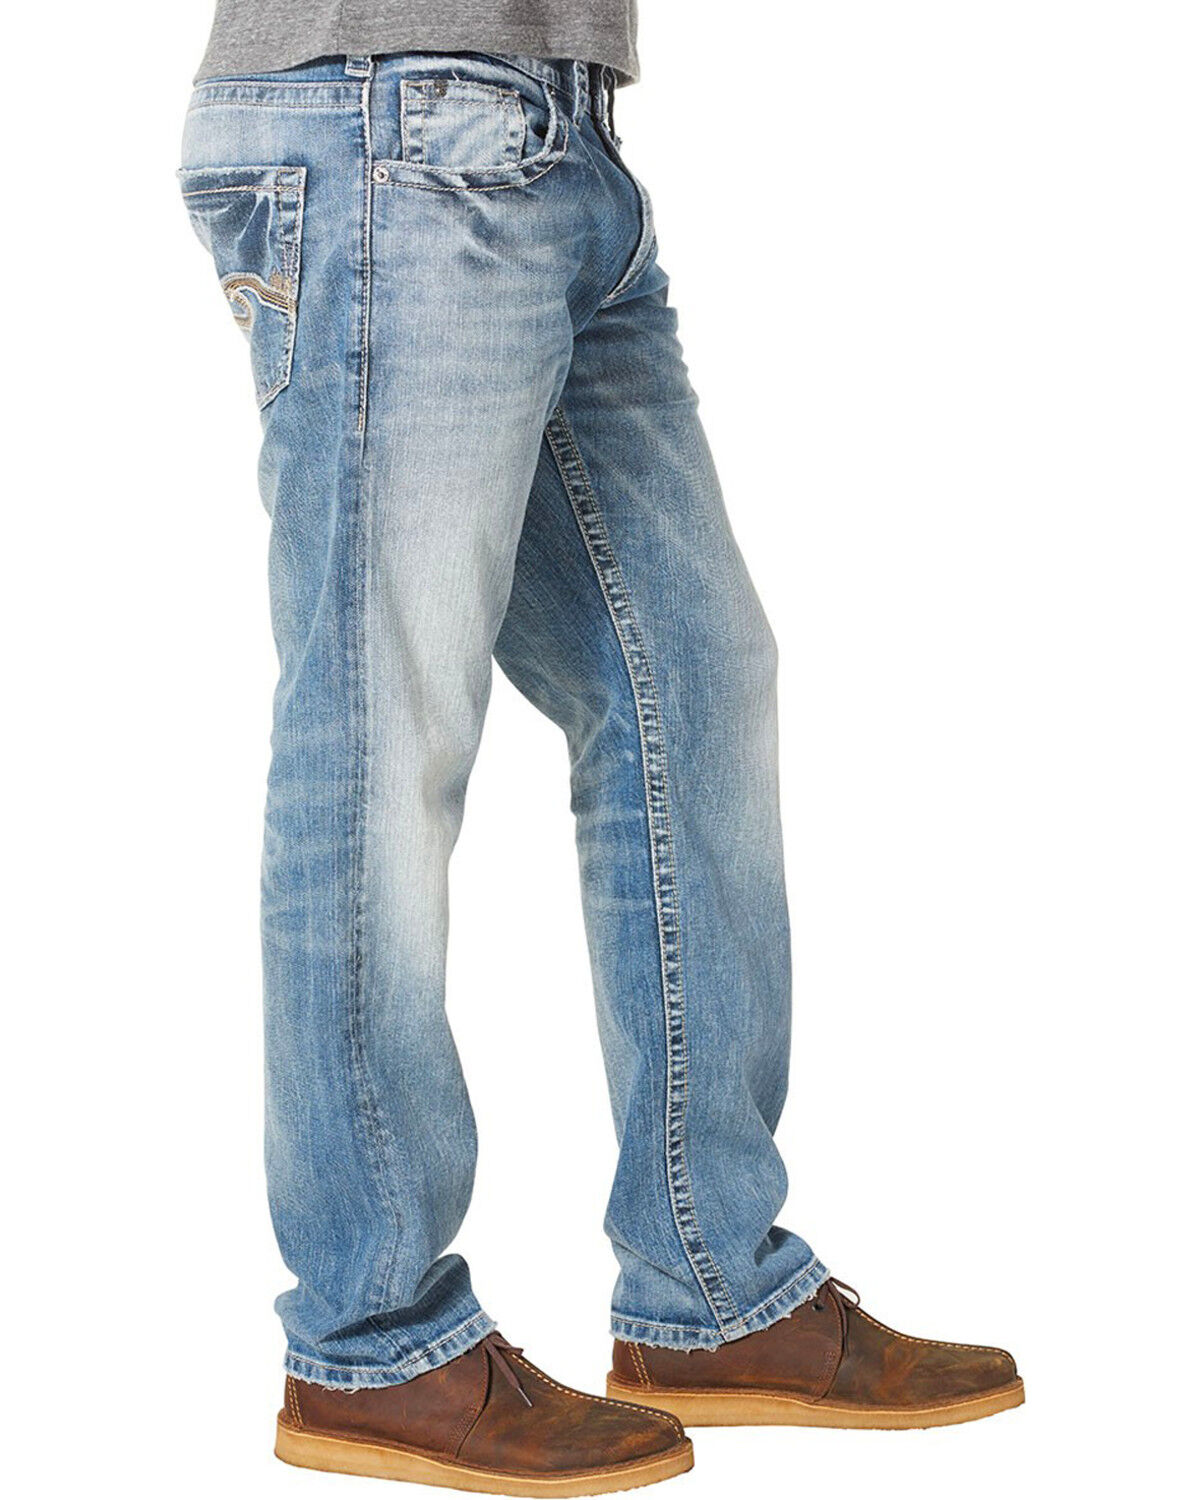 silver mens jeans